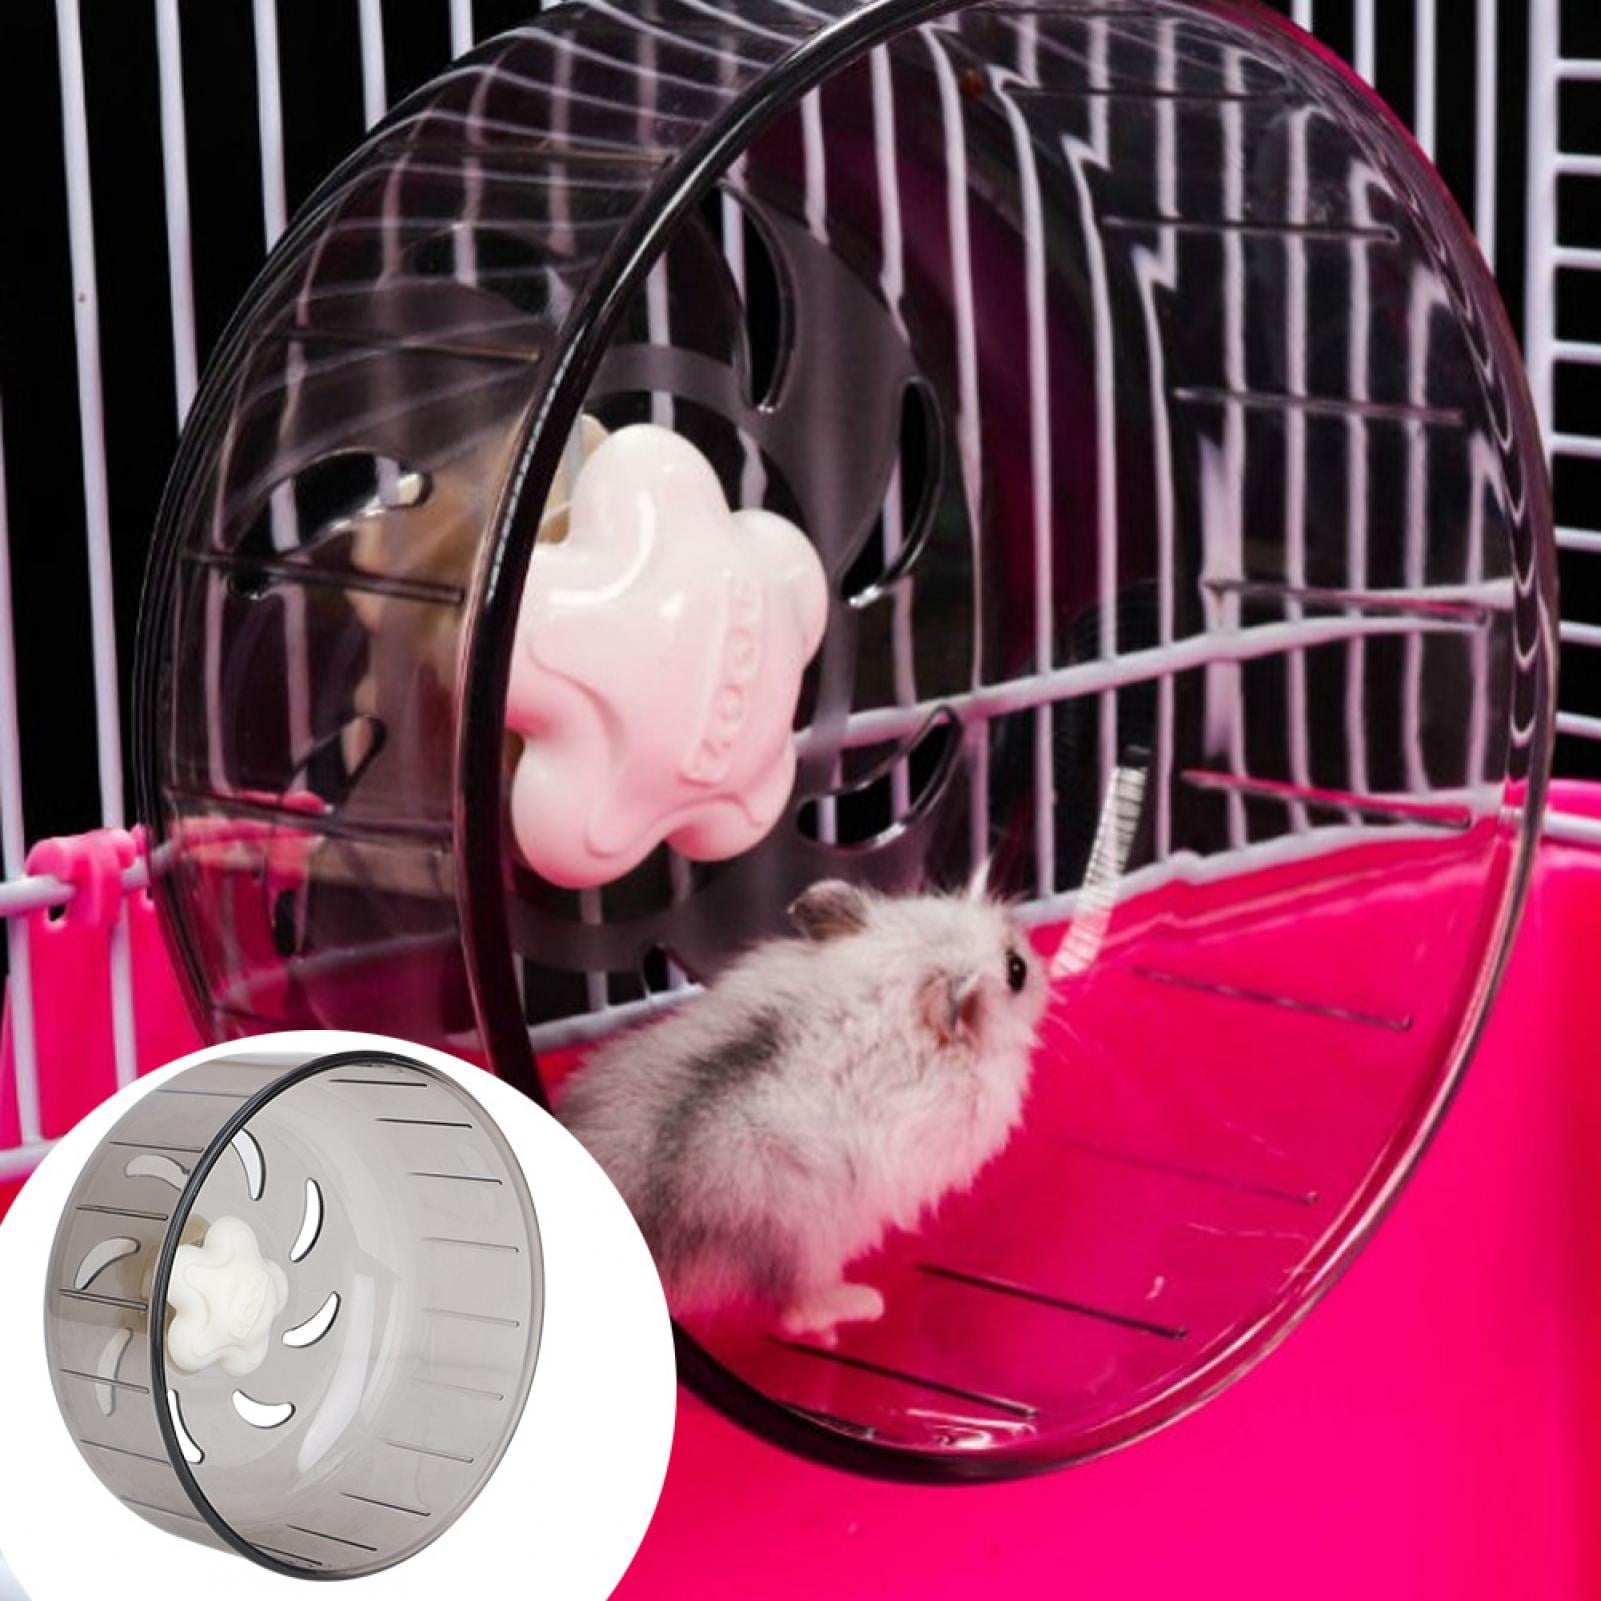 Bracket NOT Included Hamster Wheel Toy Silent Runner Spinner Exercise Running Wheel Small Pets Plastic Silent Roller Exercise Wheel Cage Attachment Suitable for Chinchilla Ferret Mice Guinea Pig